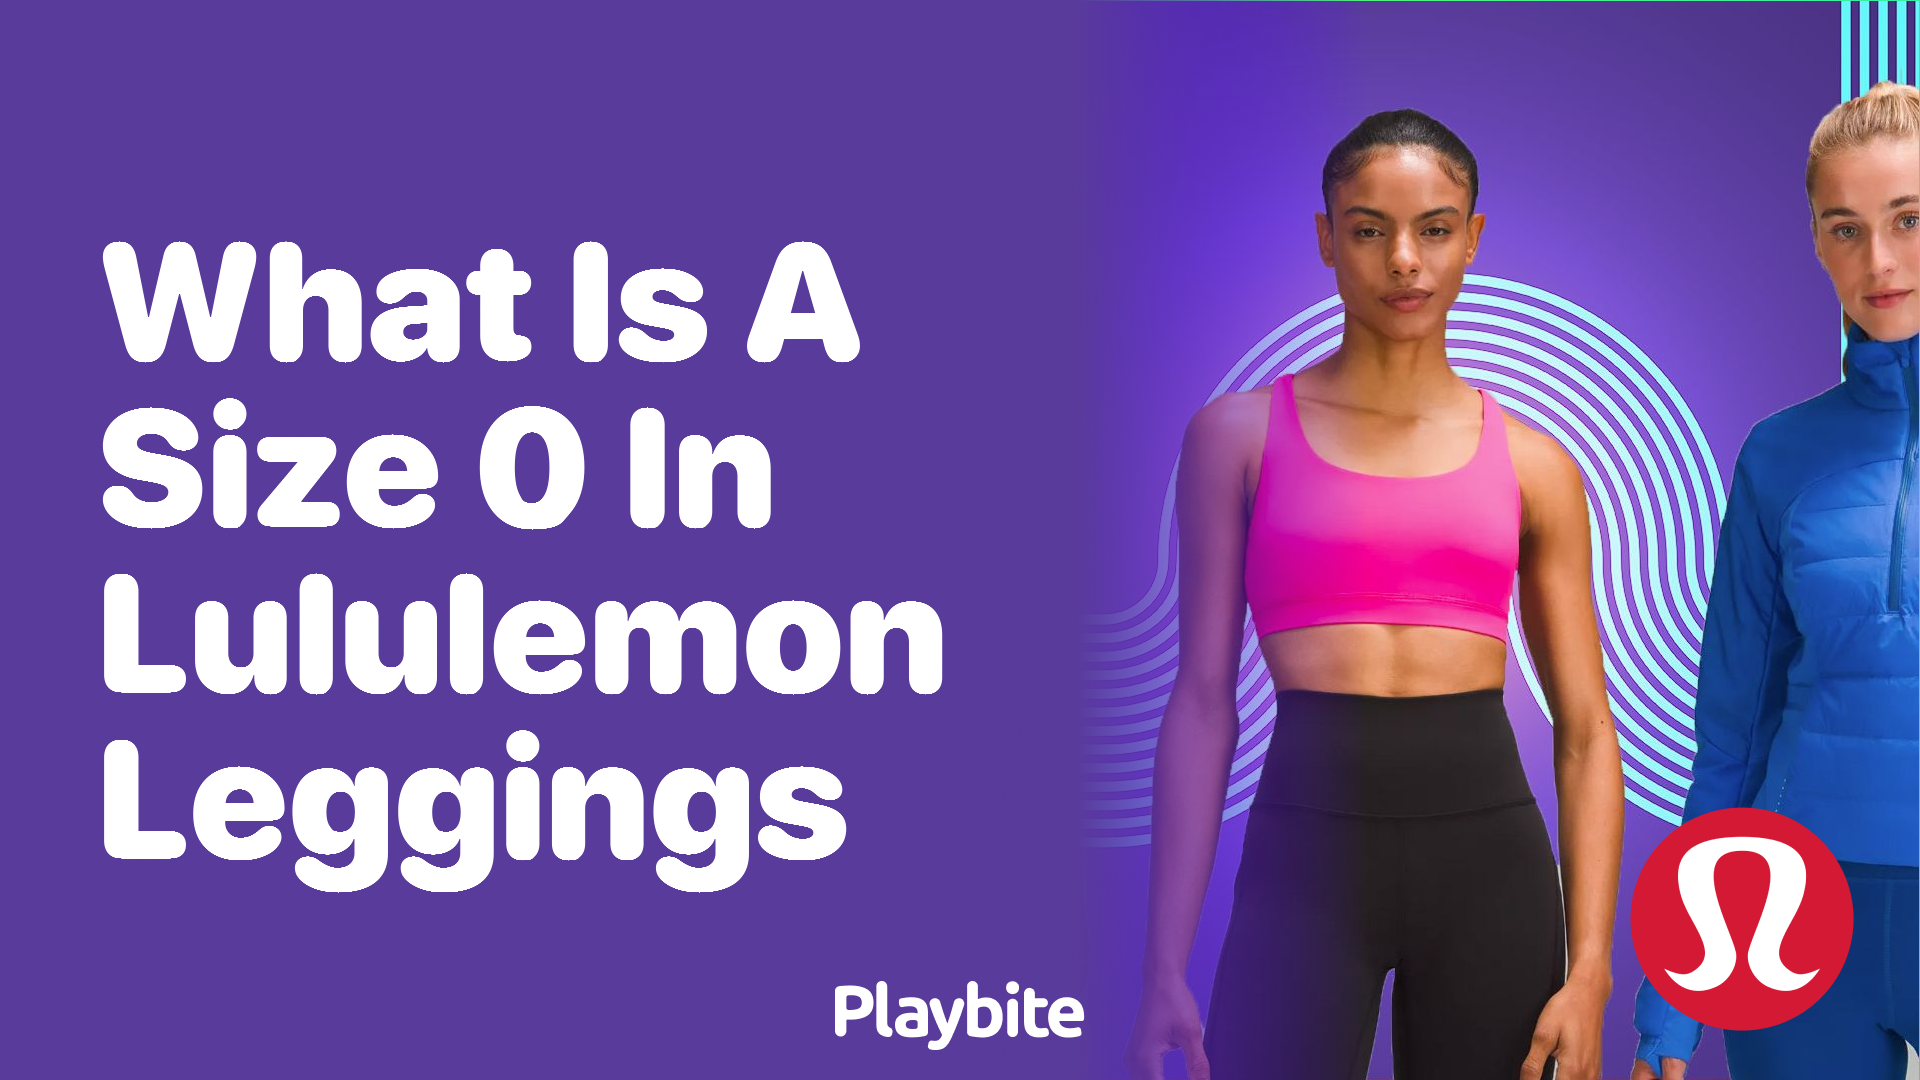 What Does a Size 0 in Lululemon Leggings Mean? - Playbite